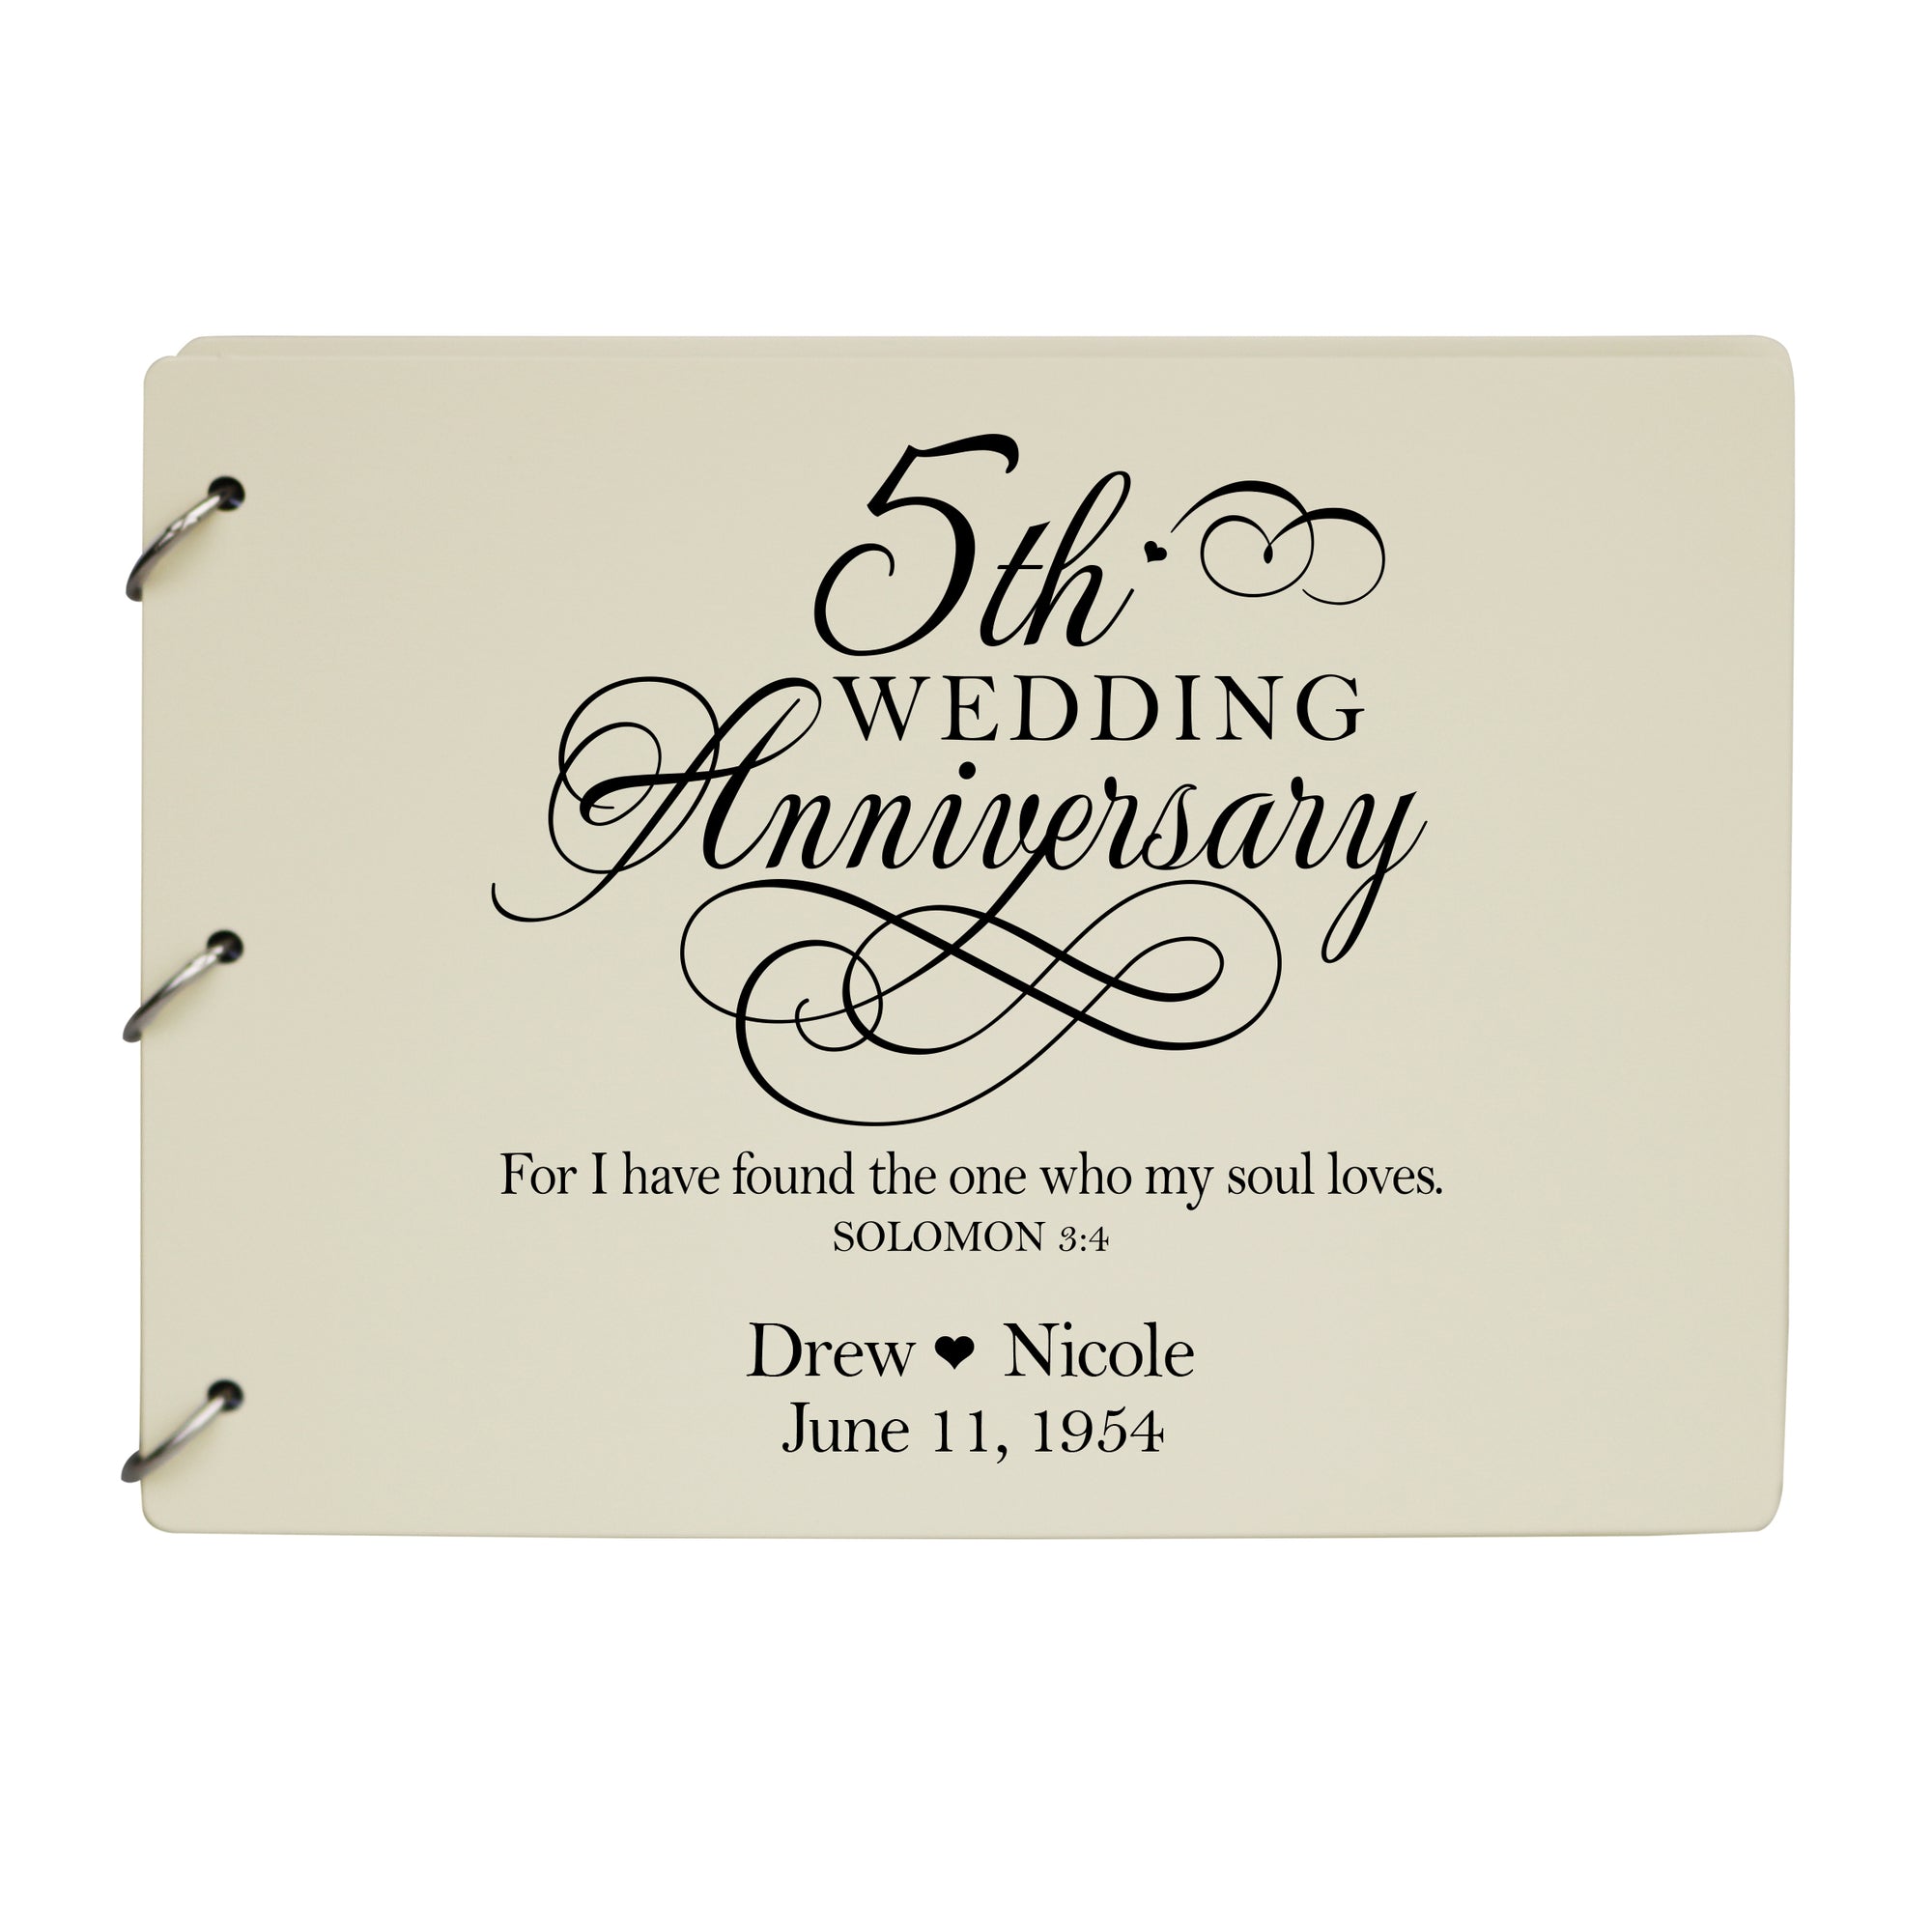 LifeSong Milestones Personalized Guestbook Sign for 5th Wedding Anniversary Gift Ideas